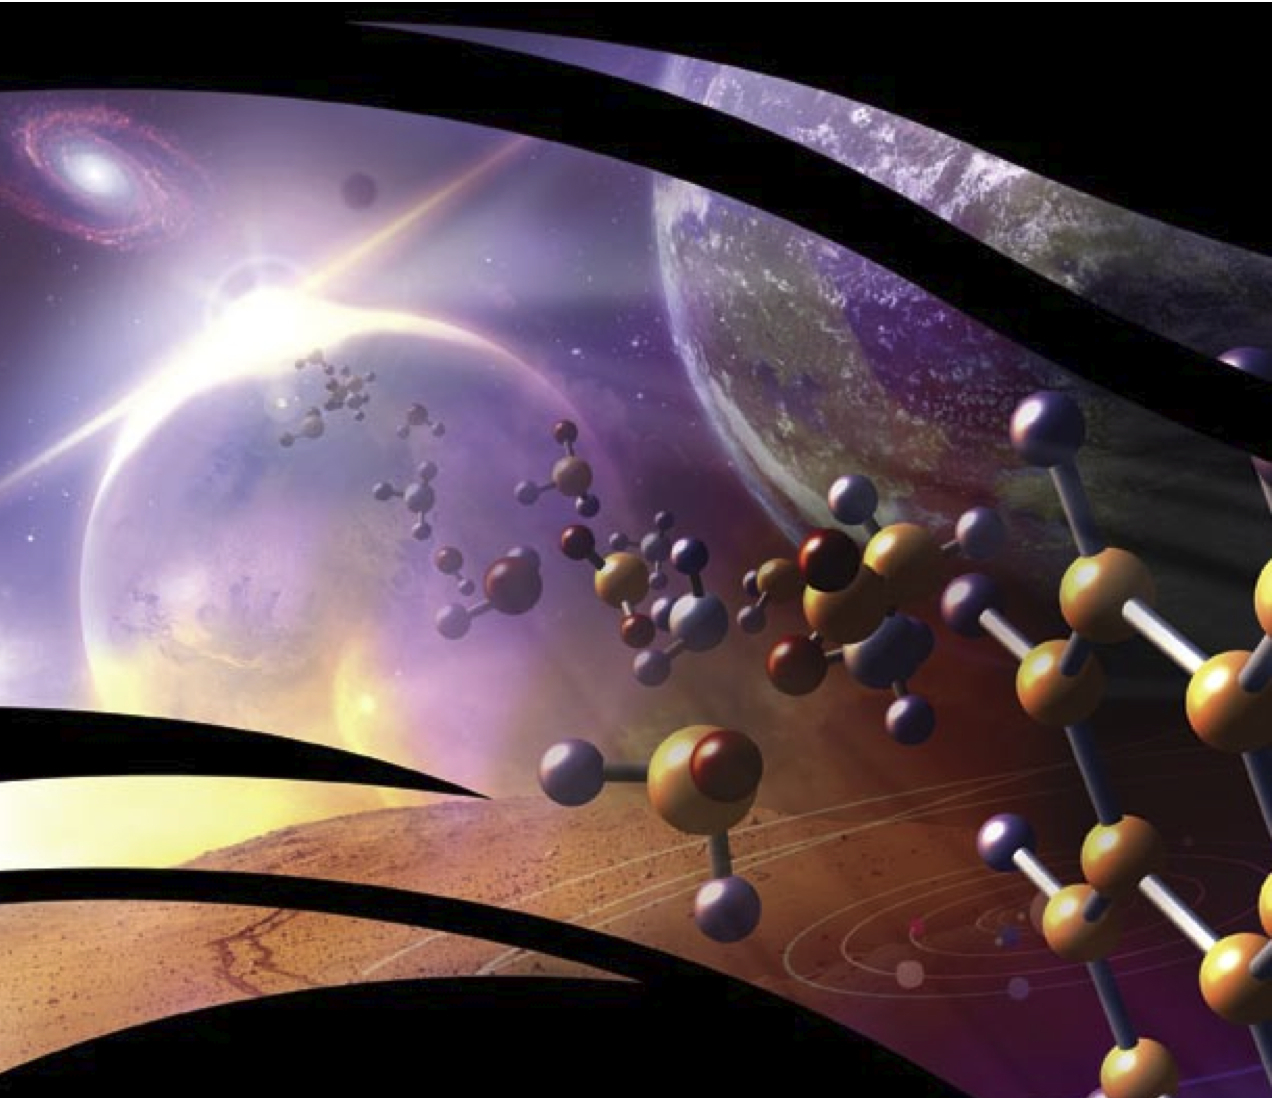 Galactic Panspermia. How far Could Life Spread Naturally in a Galaxy Like the Milky Way?